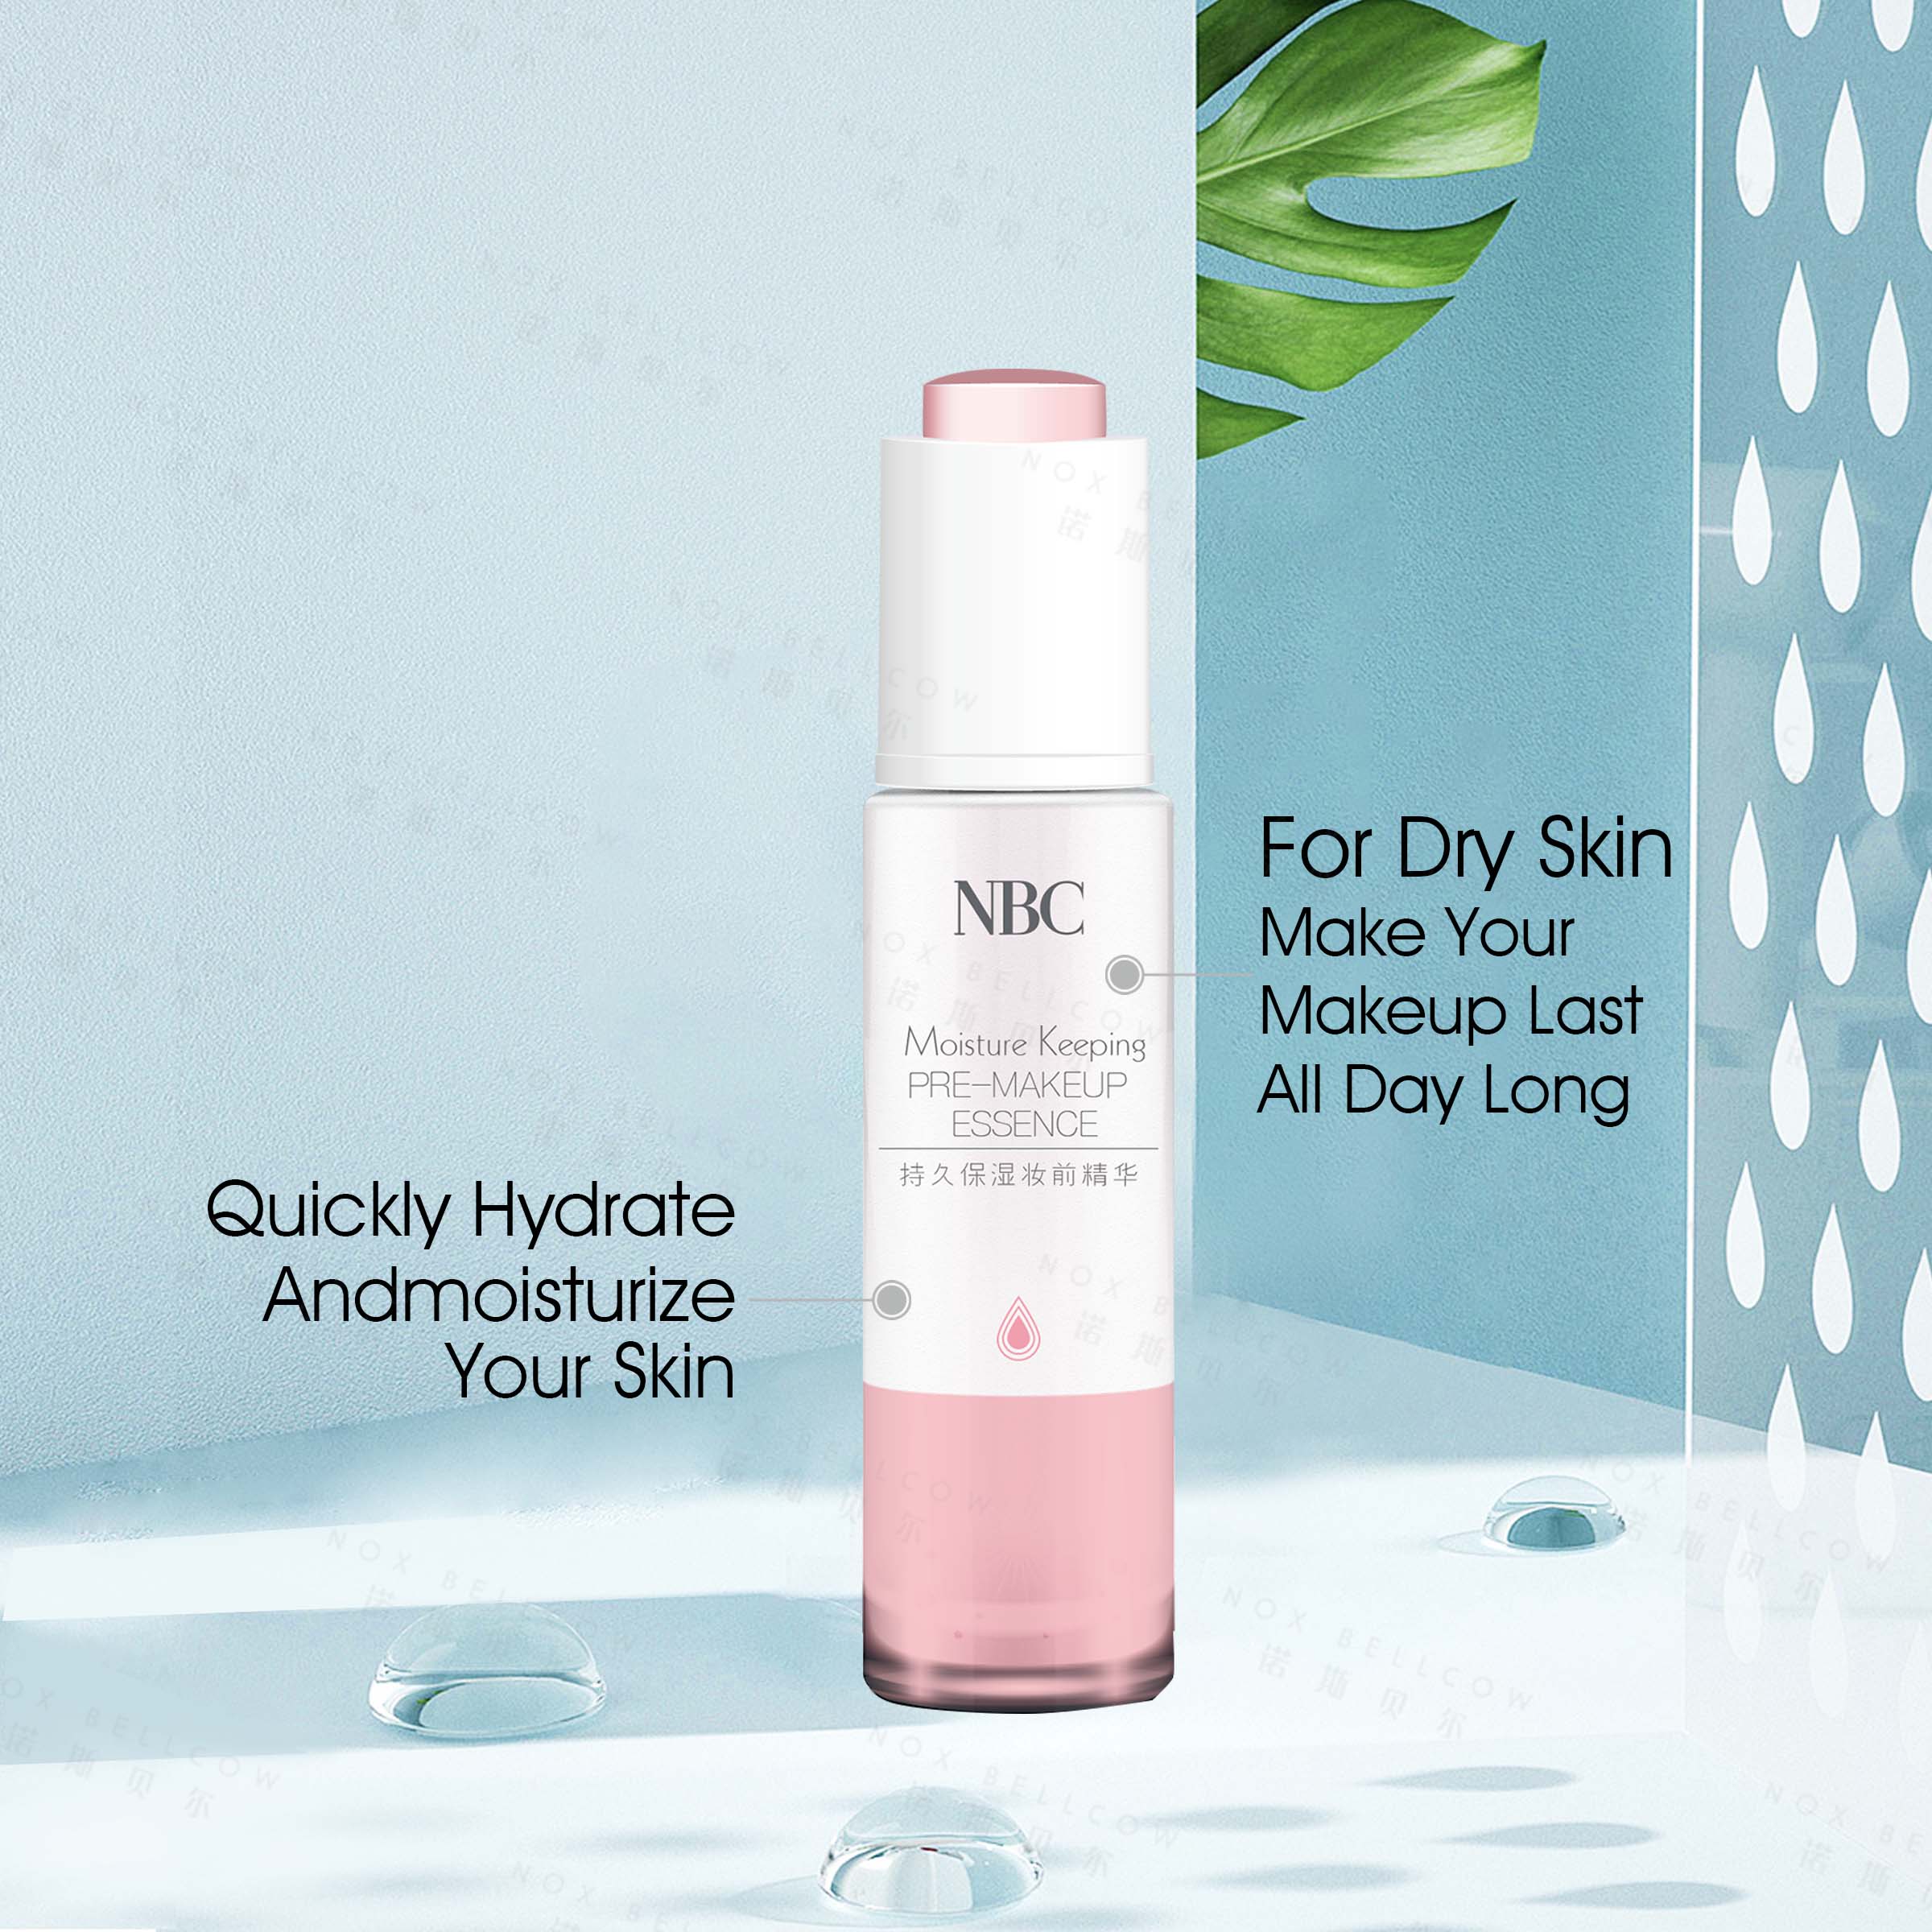 NOX BELLCOW pore minimizing products supplier-1